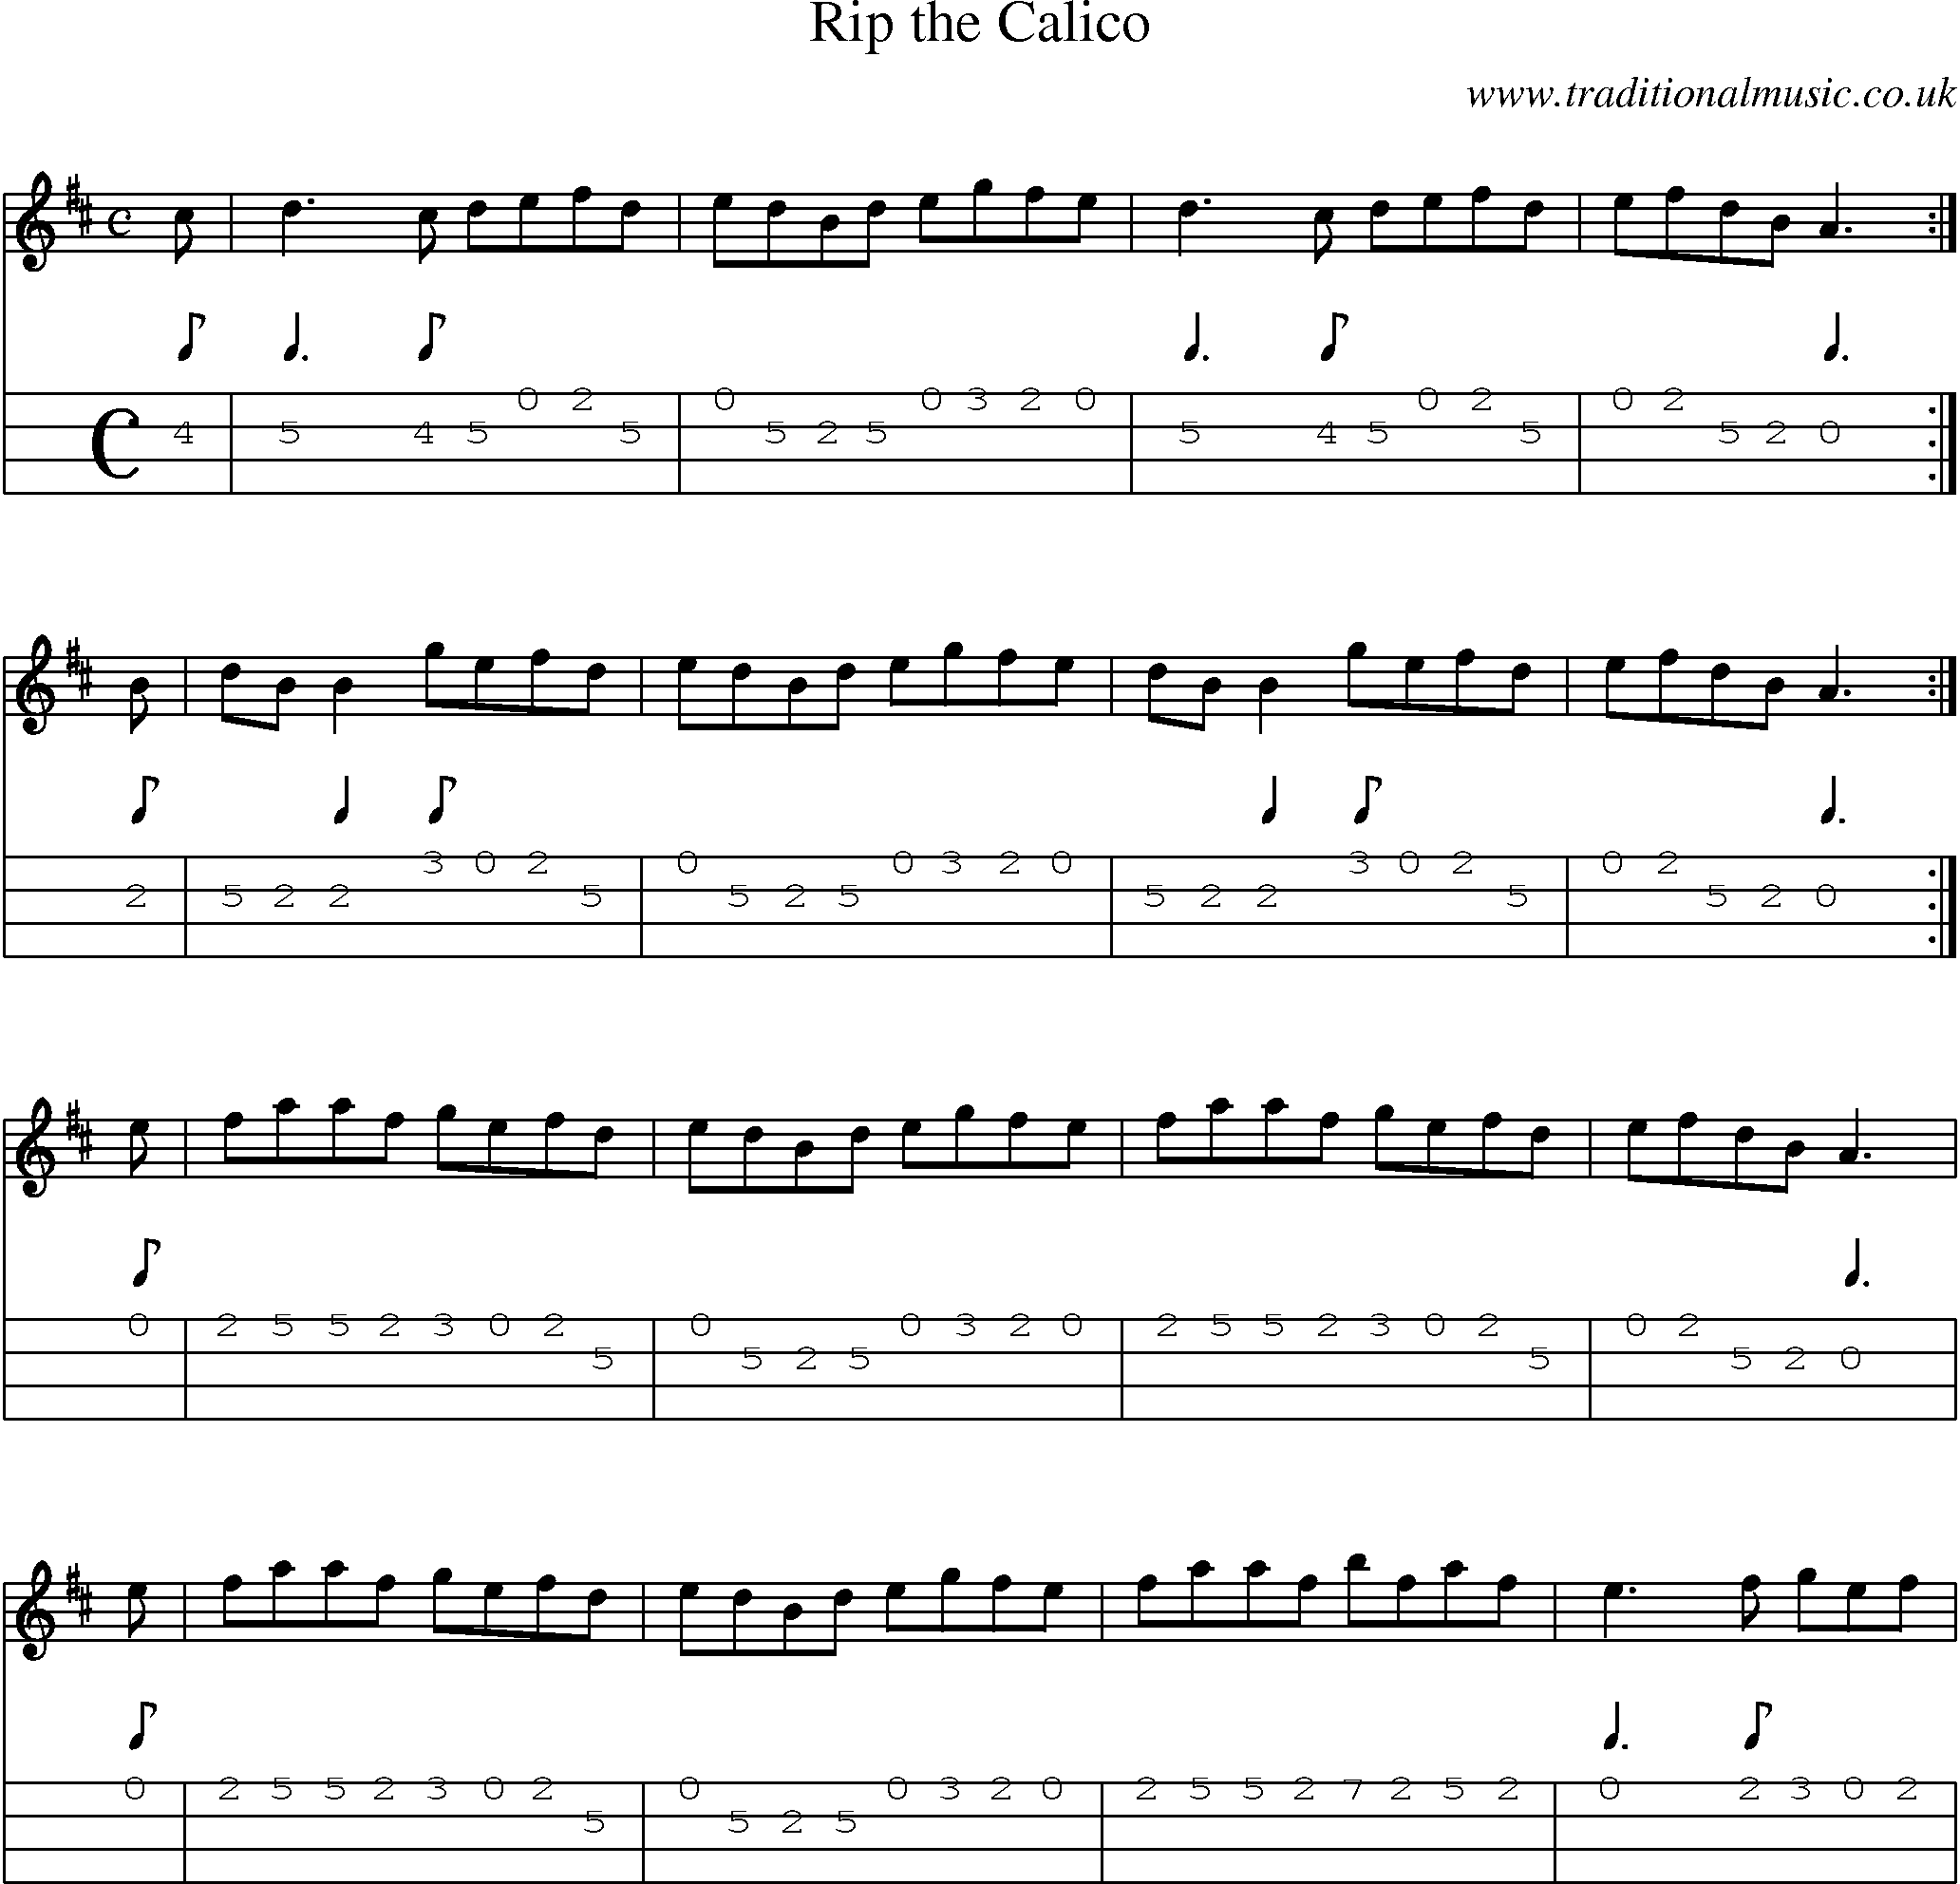 Music Score and Mandolin Tabs for Rip Calico